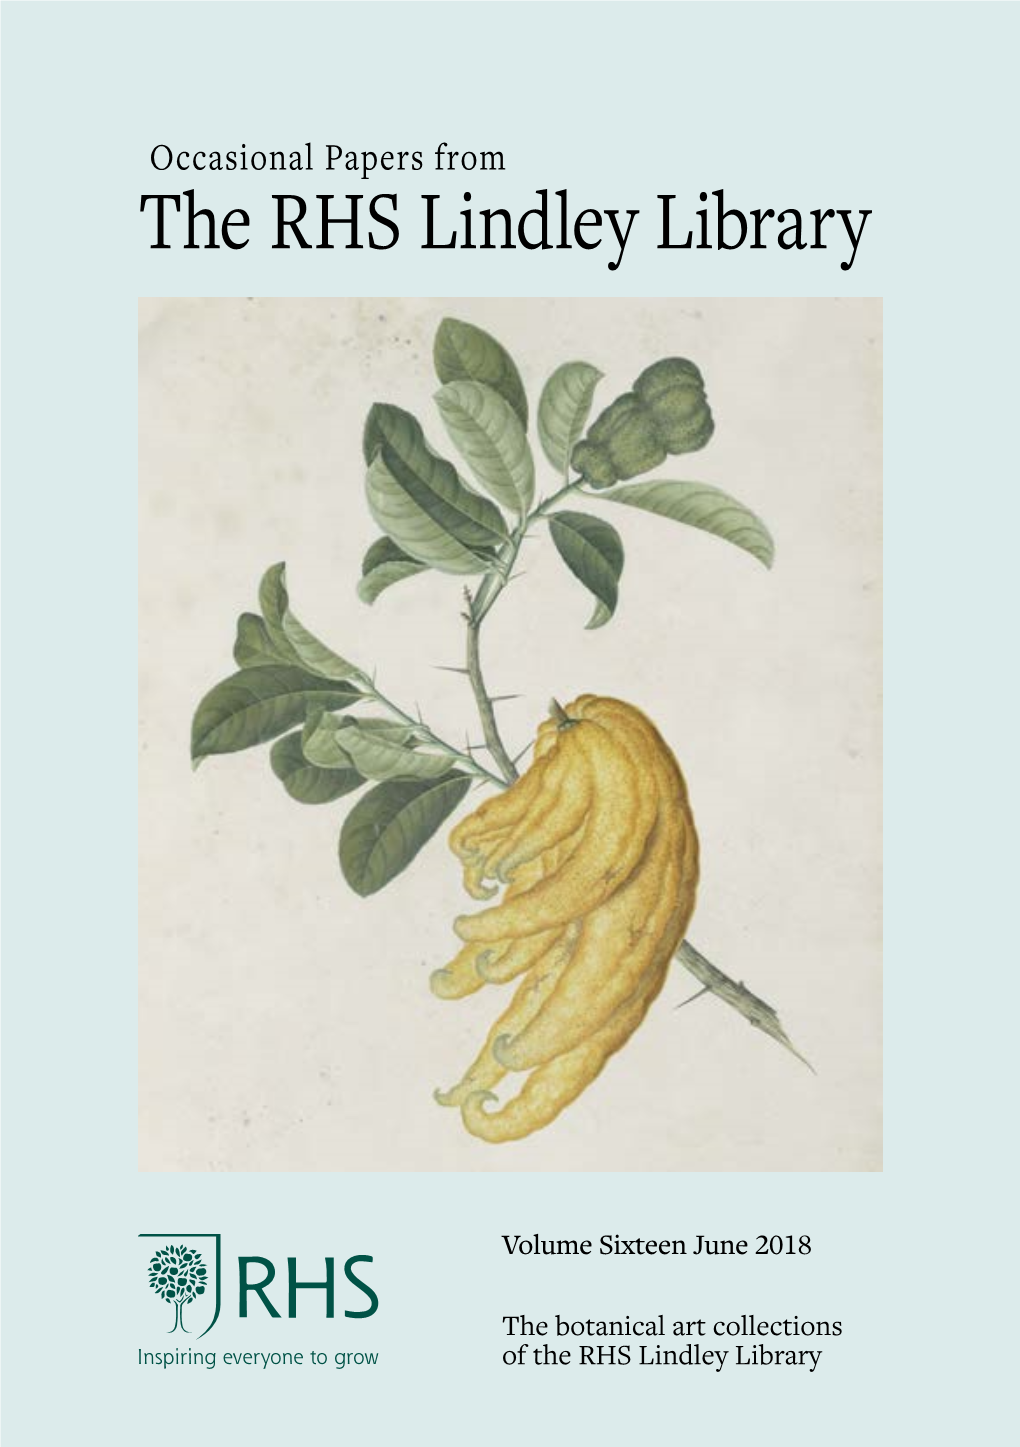 Occasional Papers from the RHS Lindley Library VOLUME 16 JUNE 2018